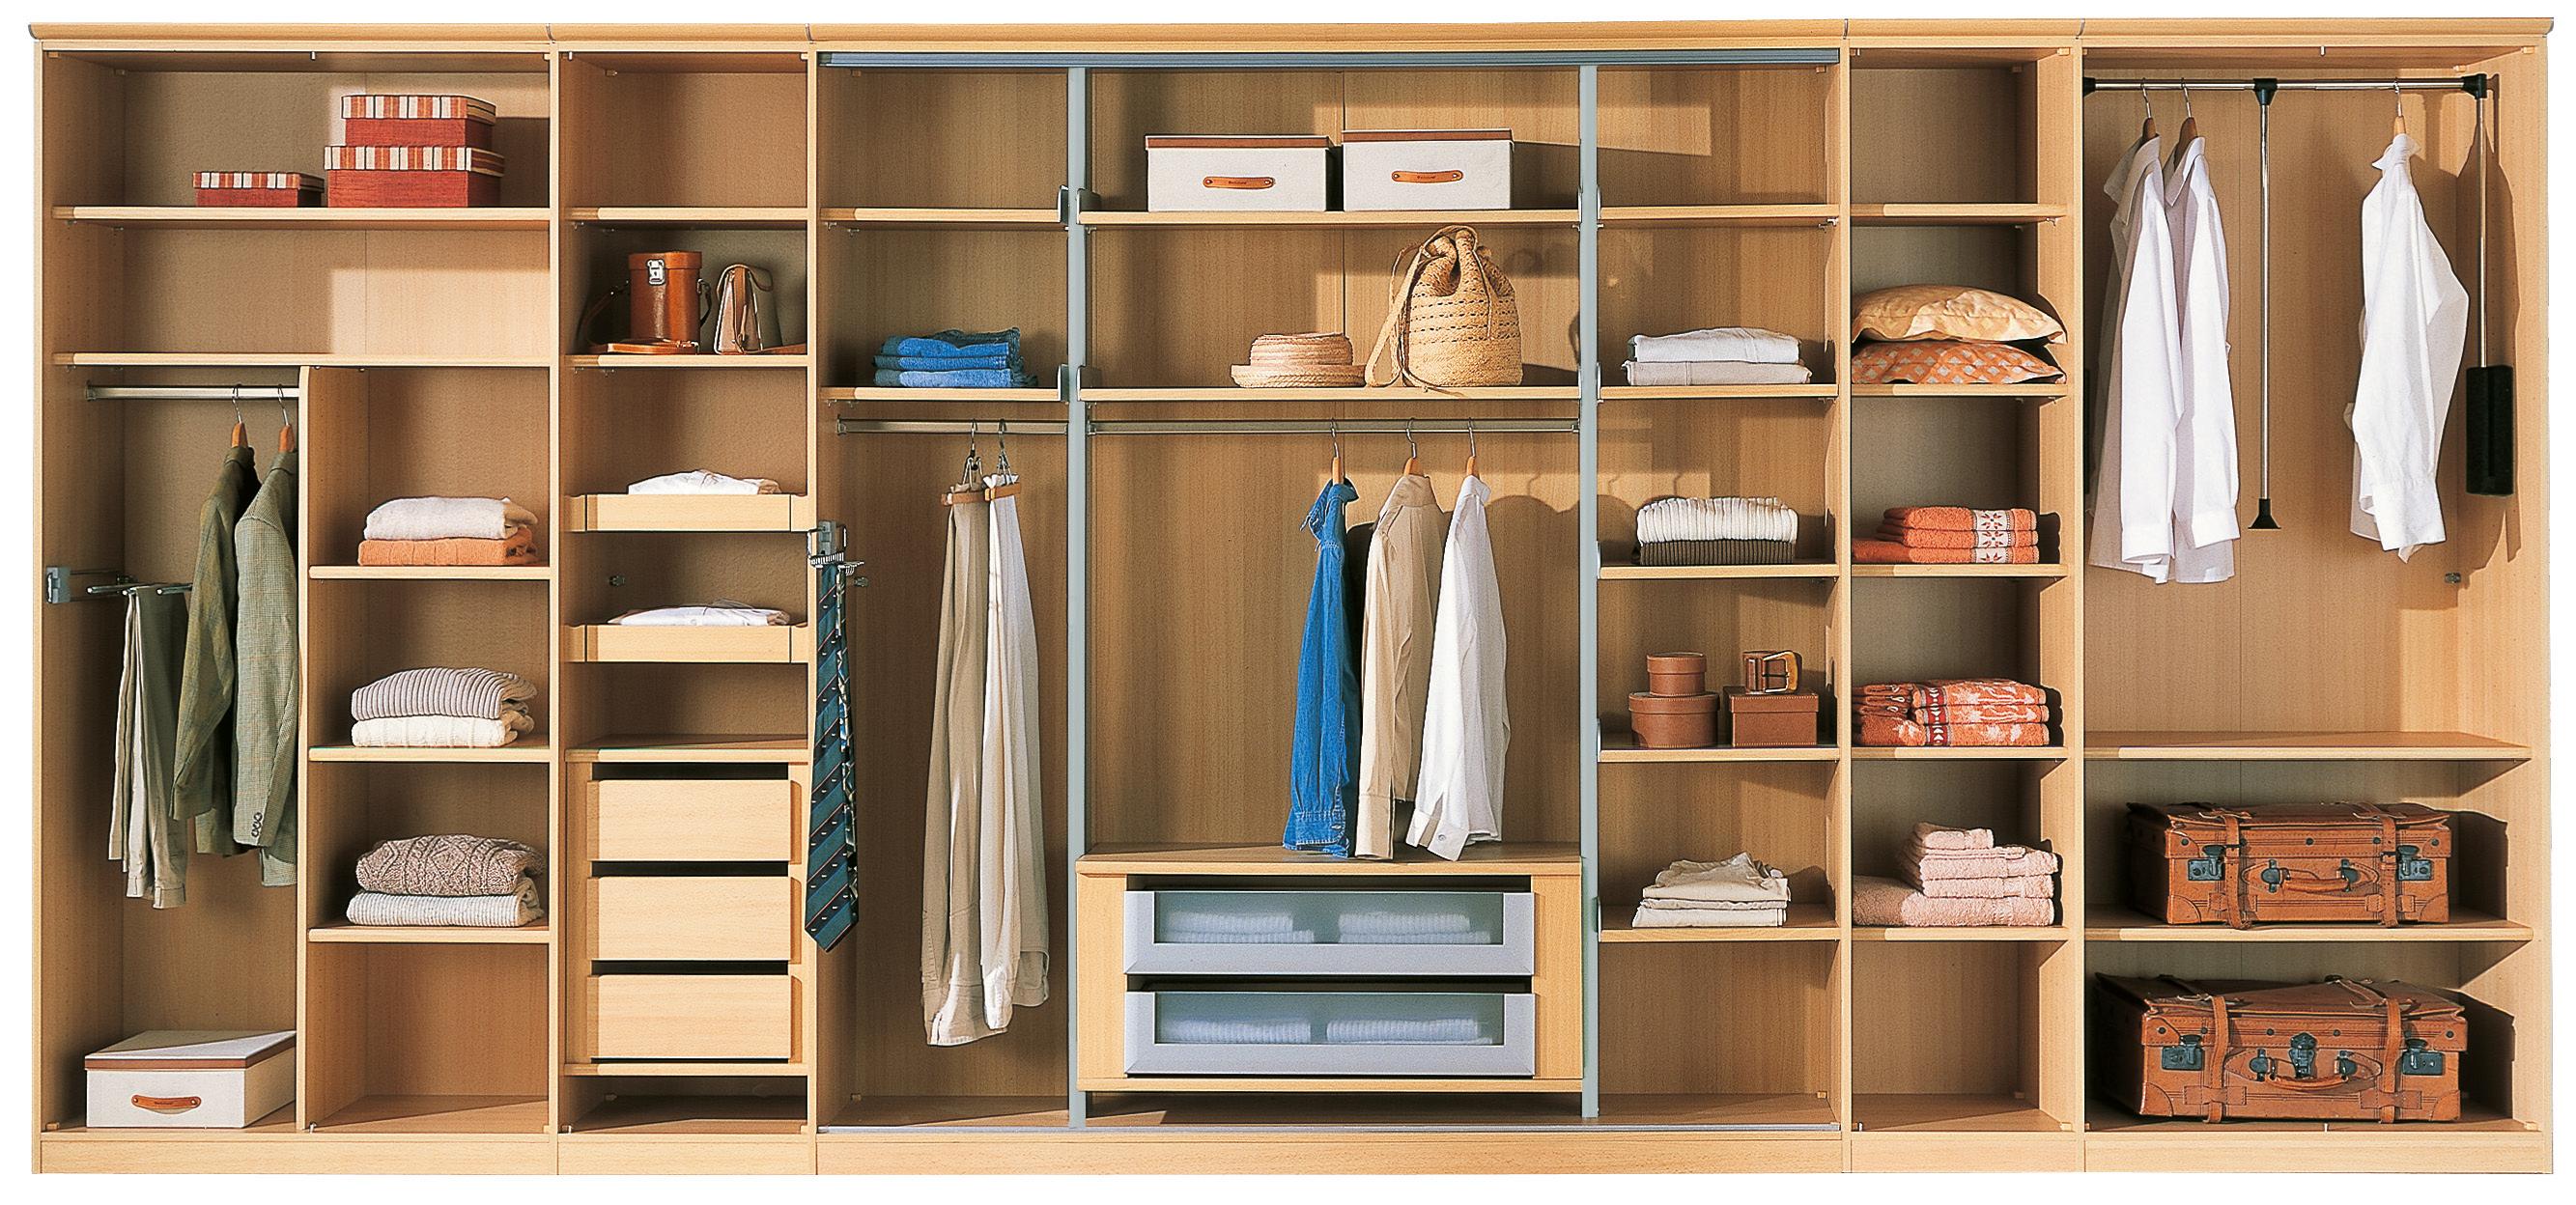 Wardrobe Market: Global Demand, Size, Trends, Growth, Segmentation, Top Manufacturers, Product Analysis, Revenue, Business Outlook